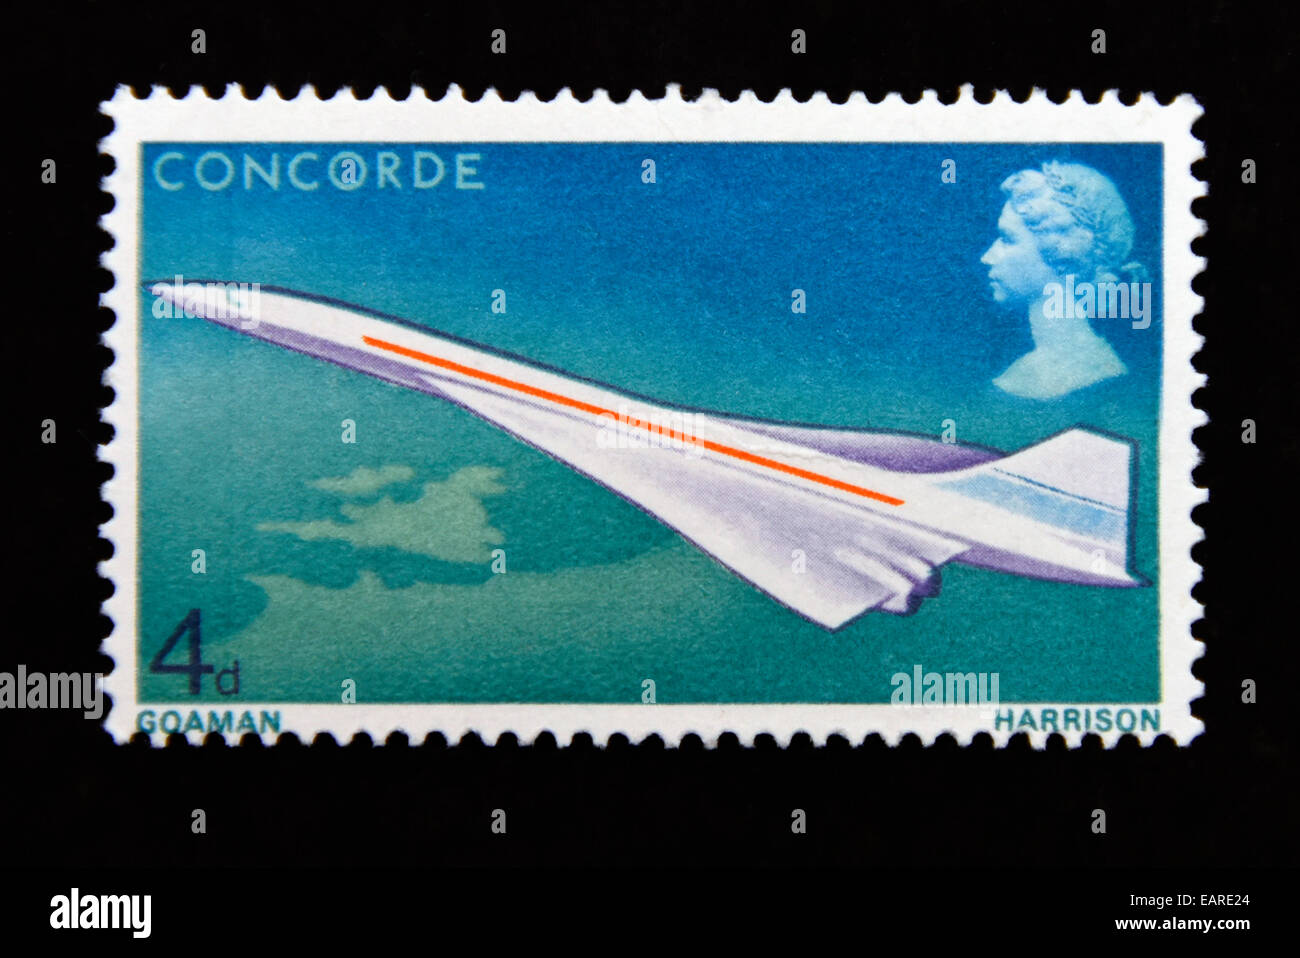 Queen Of The Skies Cards In Great Condition Concorde First Day Covers Stamps